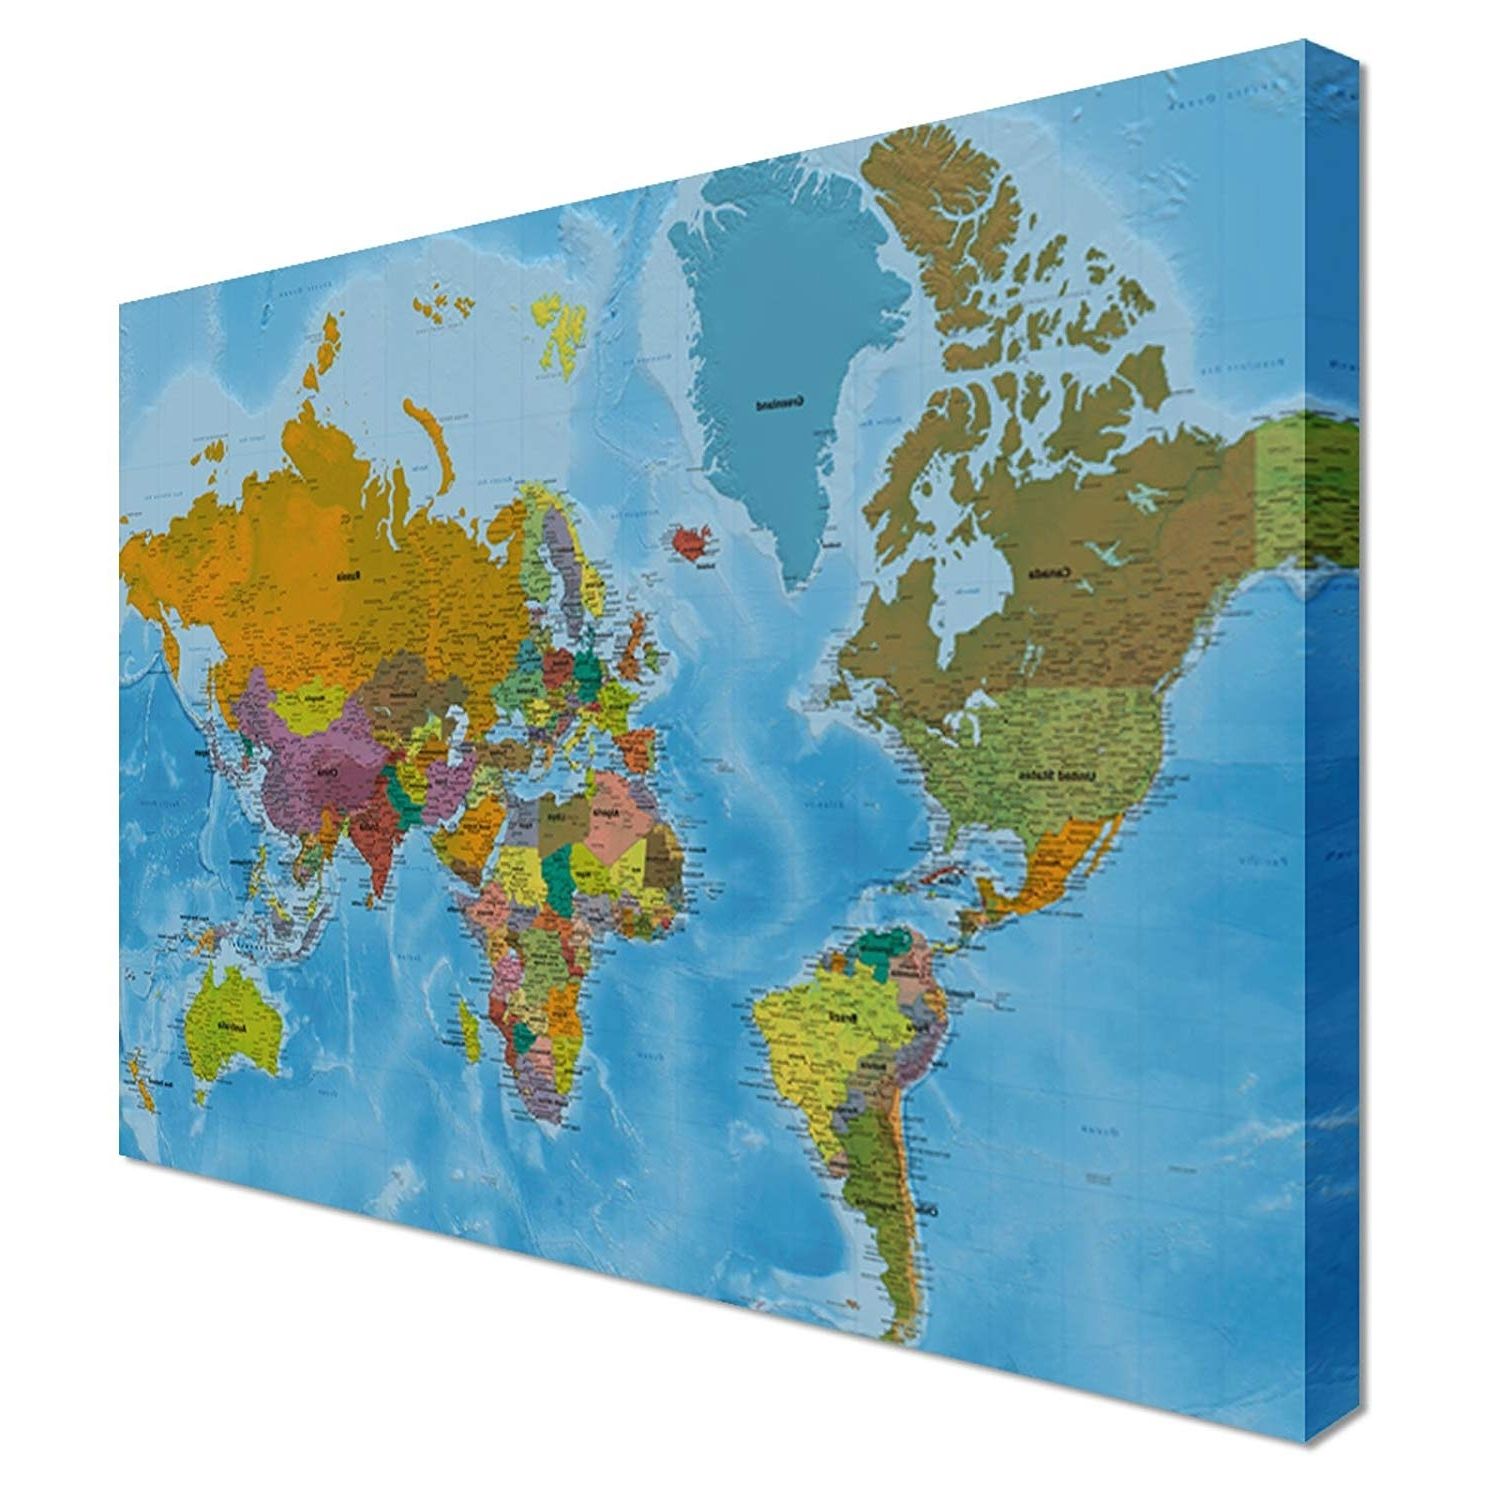 World Map Wall Art Canvas With Best And Newest Map Of The World Canvas Art Print, 22x34 Inch (a1) – 298: Amazon (View 16 of 20)